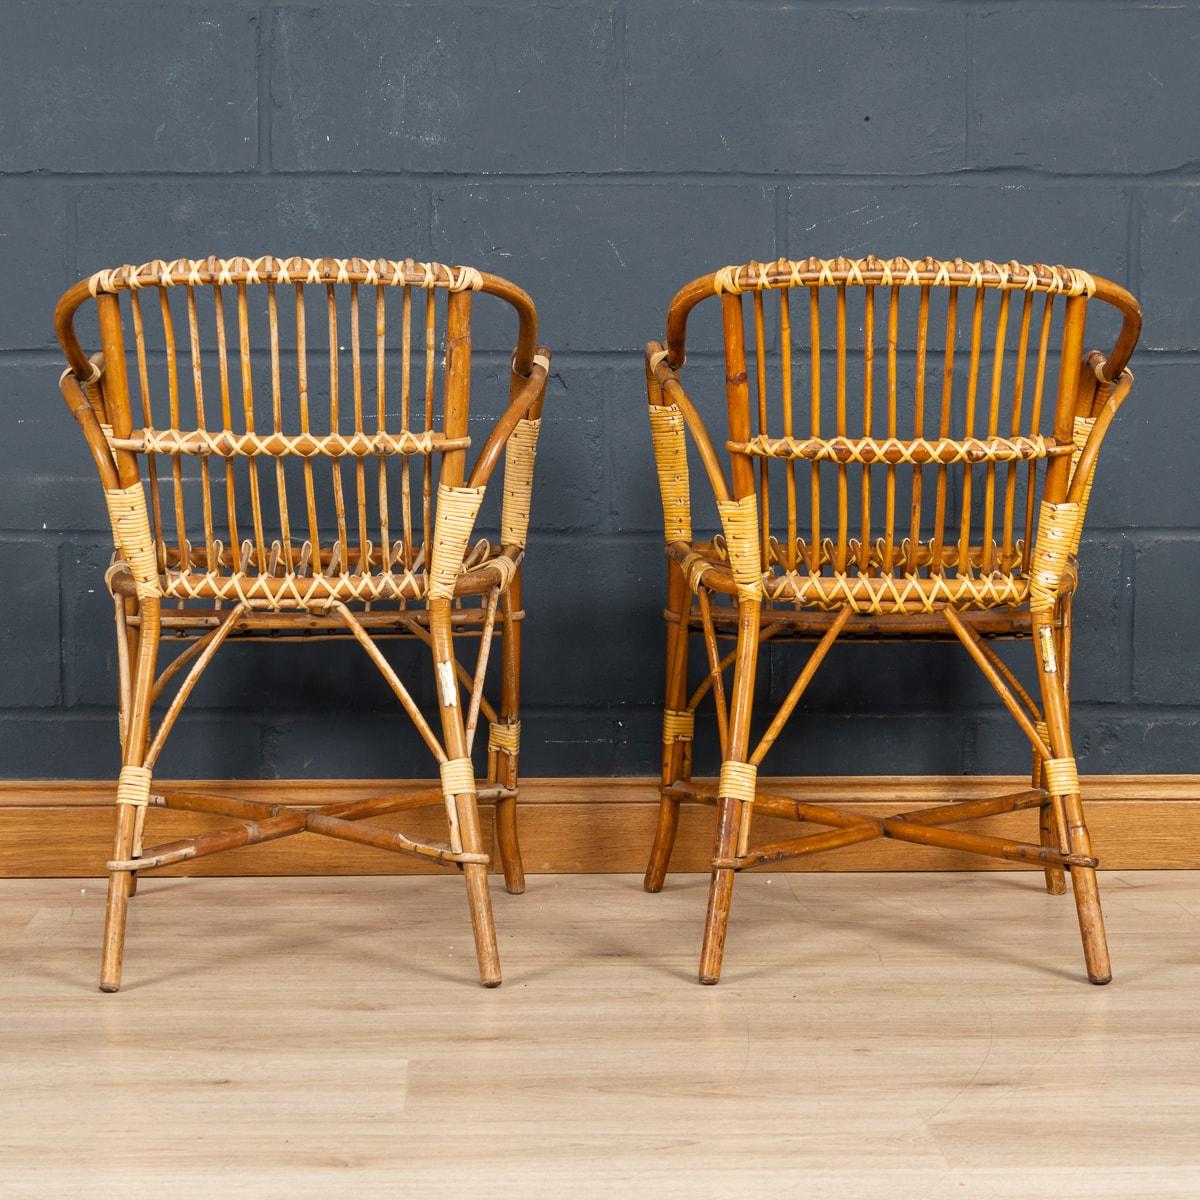 20th Century French Wicker Chairs By Drucker 2